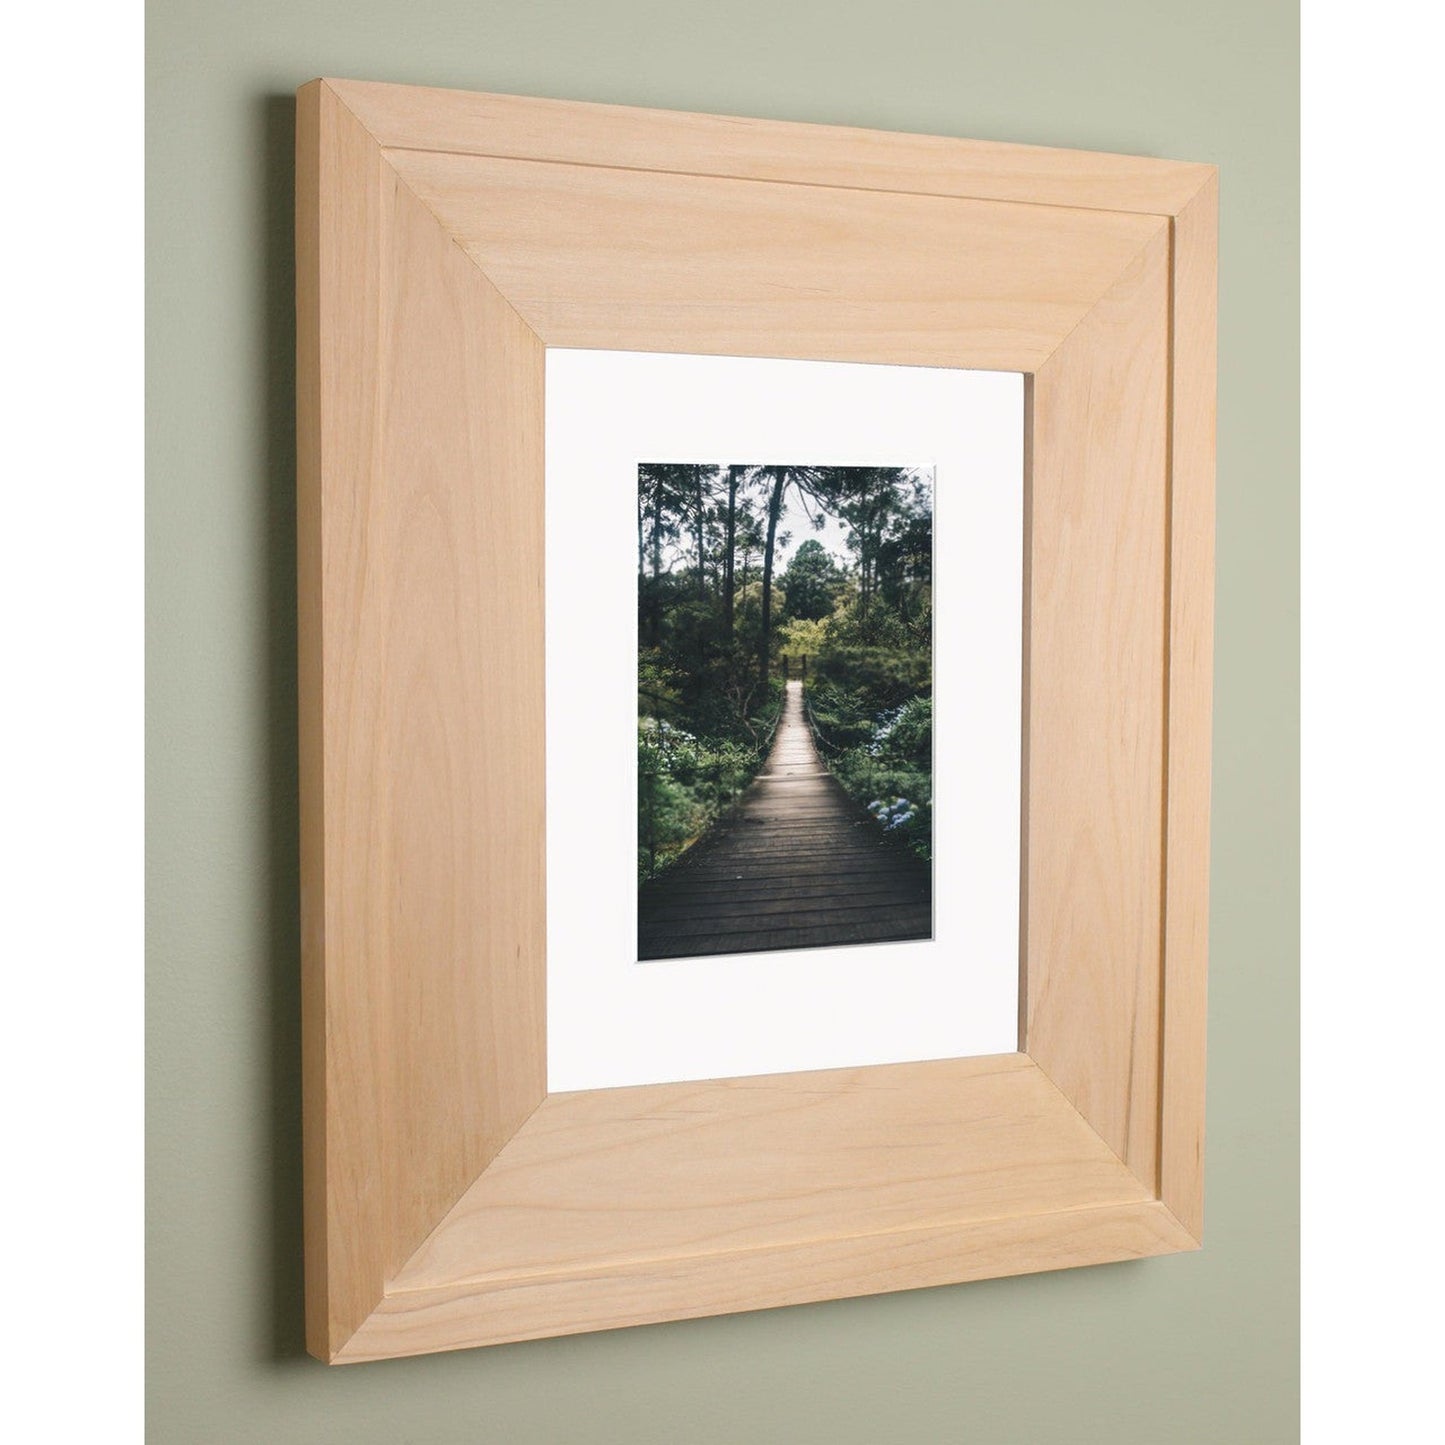 Fox Hollow Furnishings 11" x 14" Unfinished Raised Edge Compact Portrait Special 3" Depth Recessed Picture Frame Medicine Cabinet With Mirror and White Matting